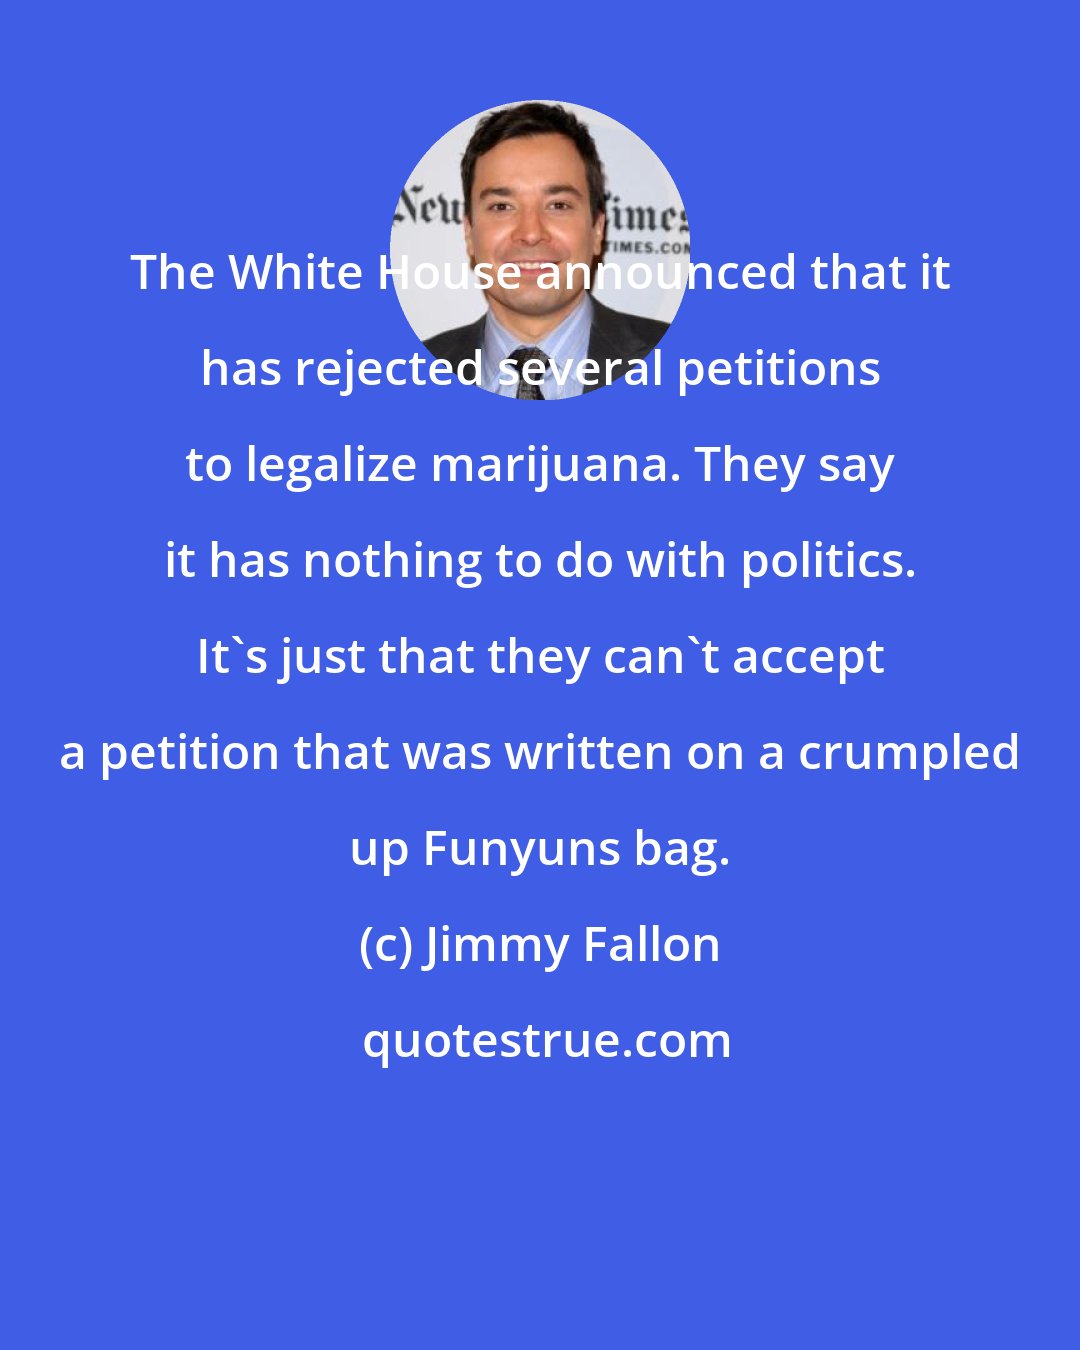 Jimmy Fallon: The White House announced that it has rejected several petitions to legalize marijuana. They say it has nothing to do with politics. It's just that they can't accept a petition that was written on a crumpled up Funyuns bag.